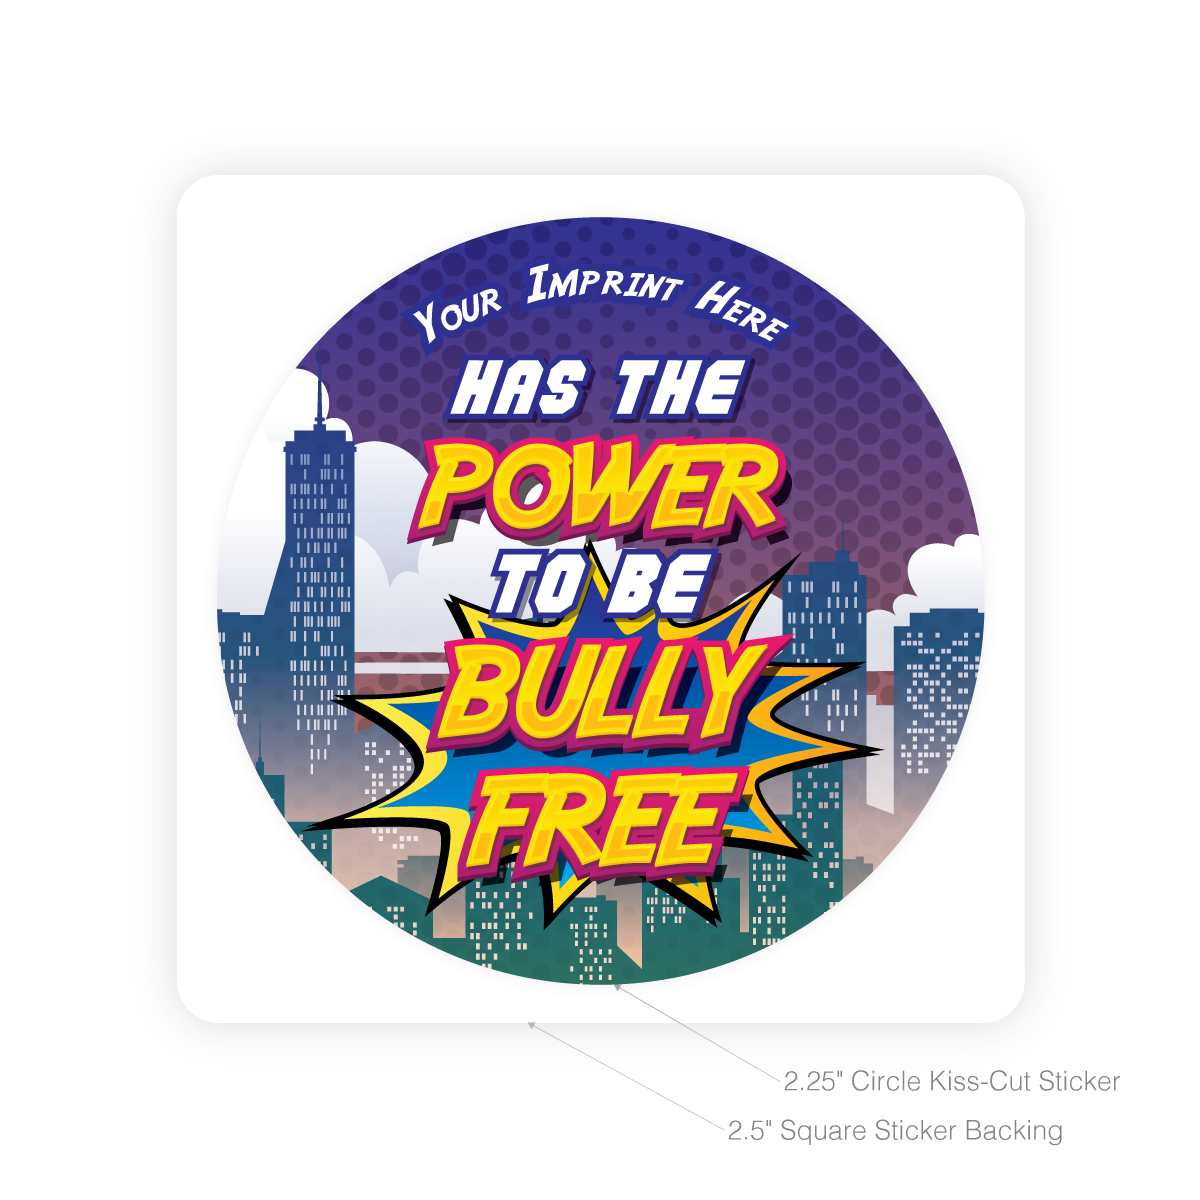 Custom Round Sticker - The Power to be Bully Free